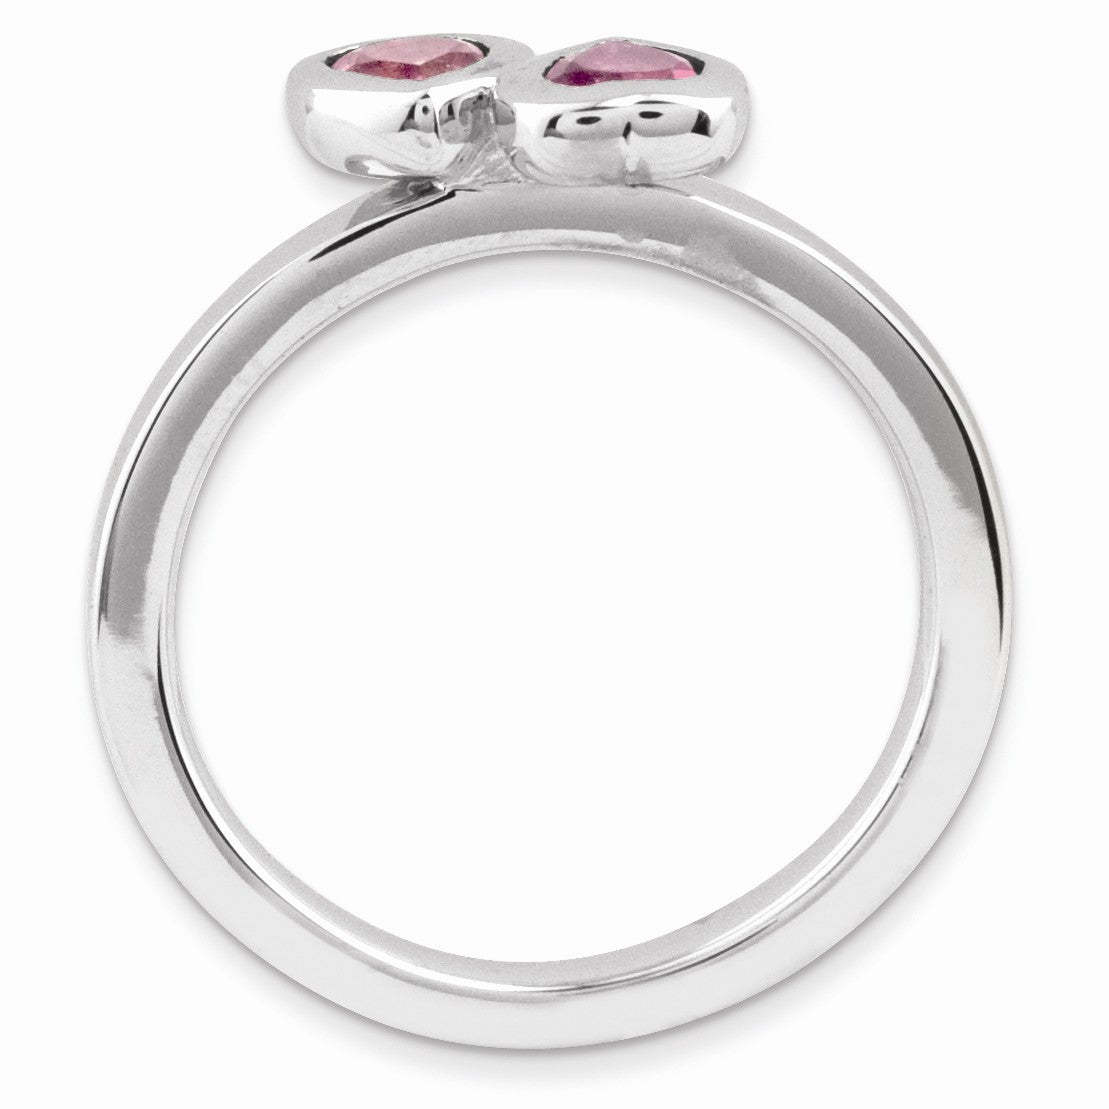 Alternate view of the Sterling Silver Stackable Double Heart Pink Tourmaline Ring by The Black Bow Jewelry Co.